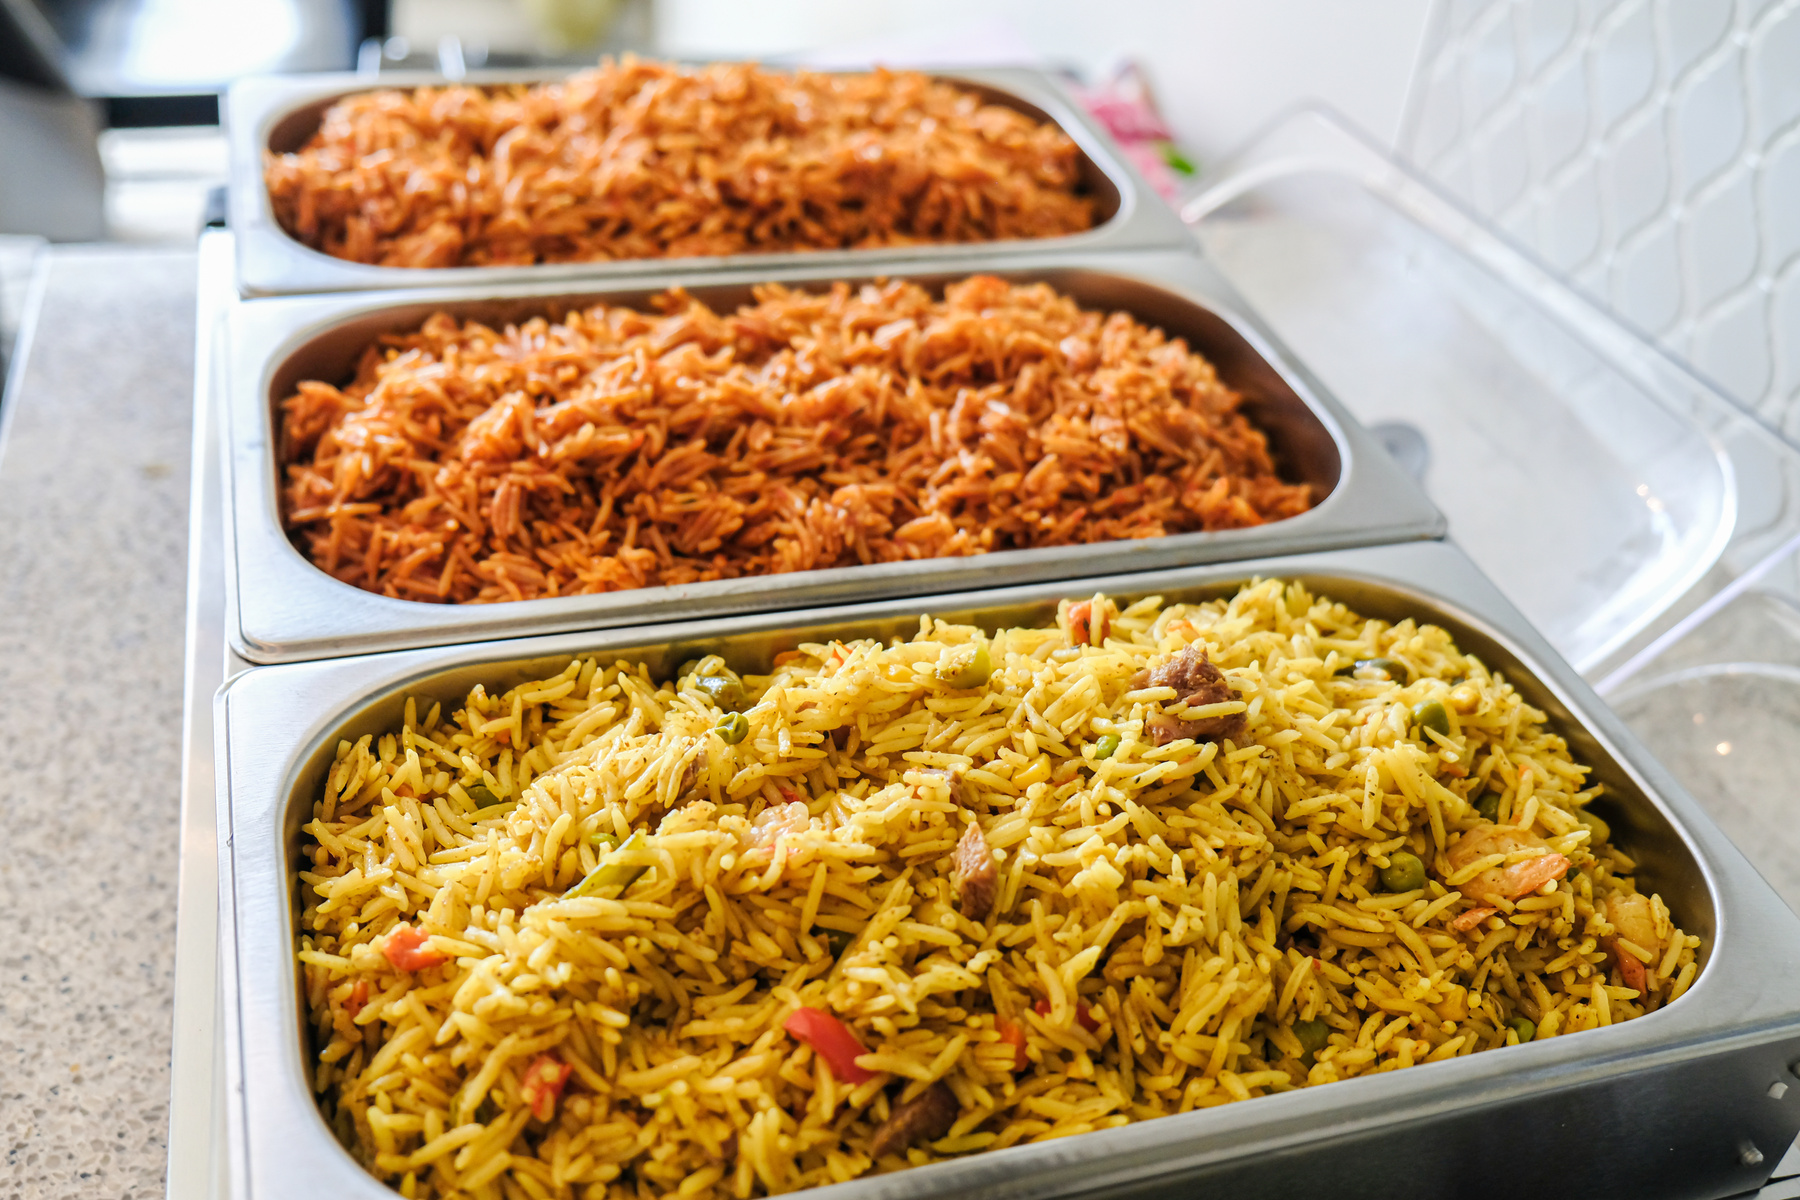 Nigerian Jollof and Vegetable Fried Rice served in Chaffing dish